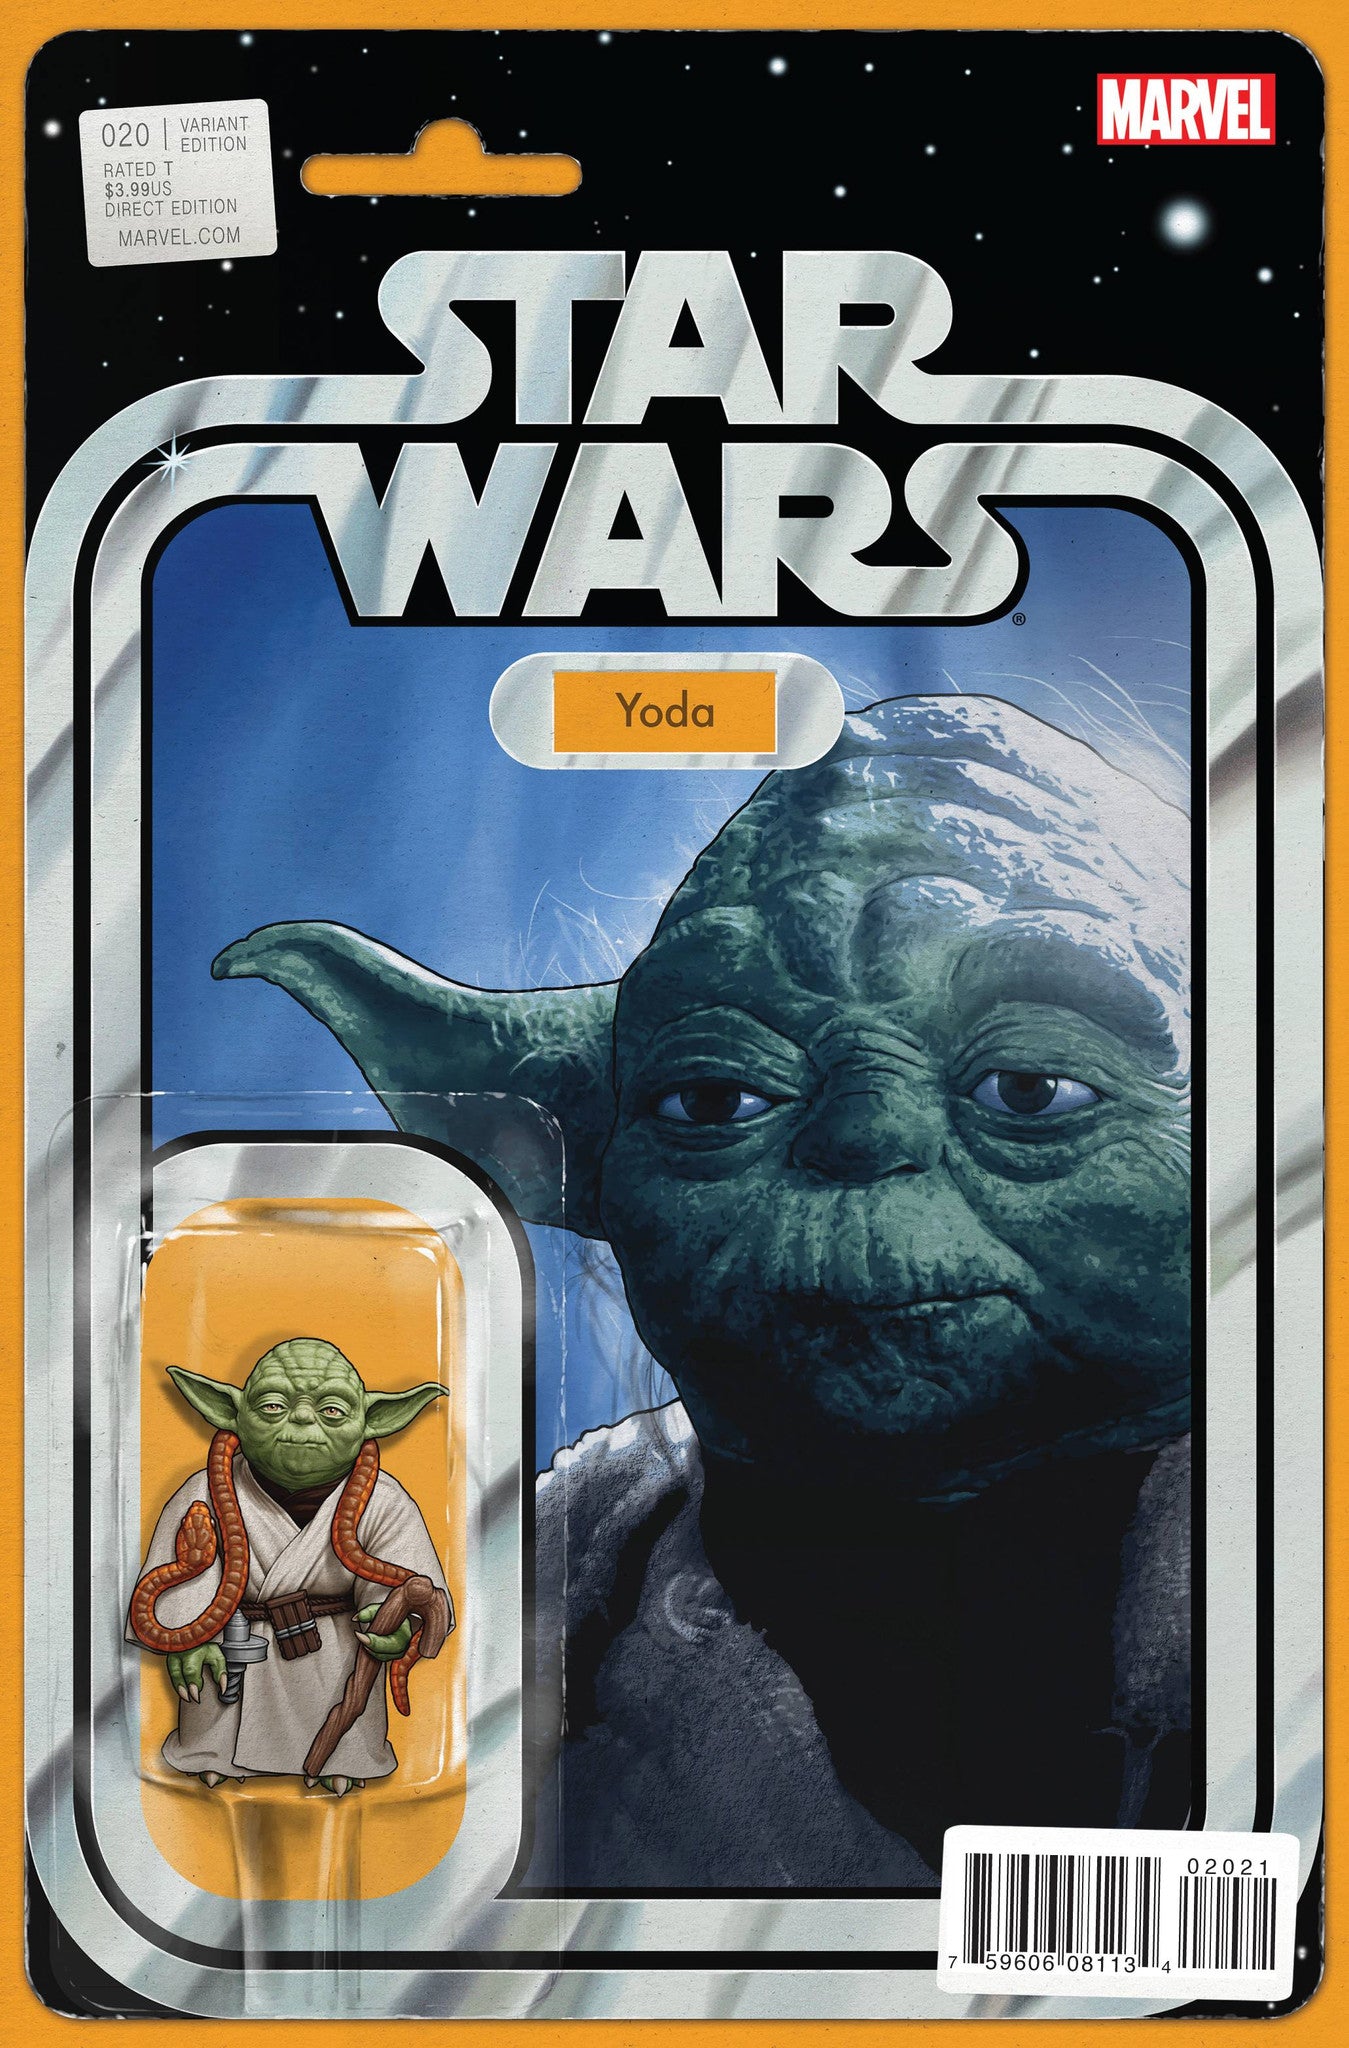 STAR WARS #20 CHRISTOPHER ACTION FIGURE VARIANT COVER